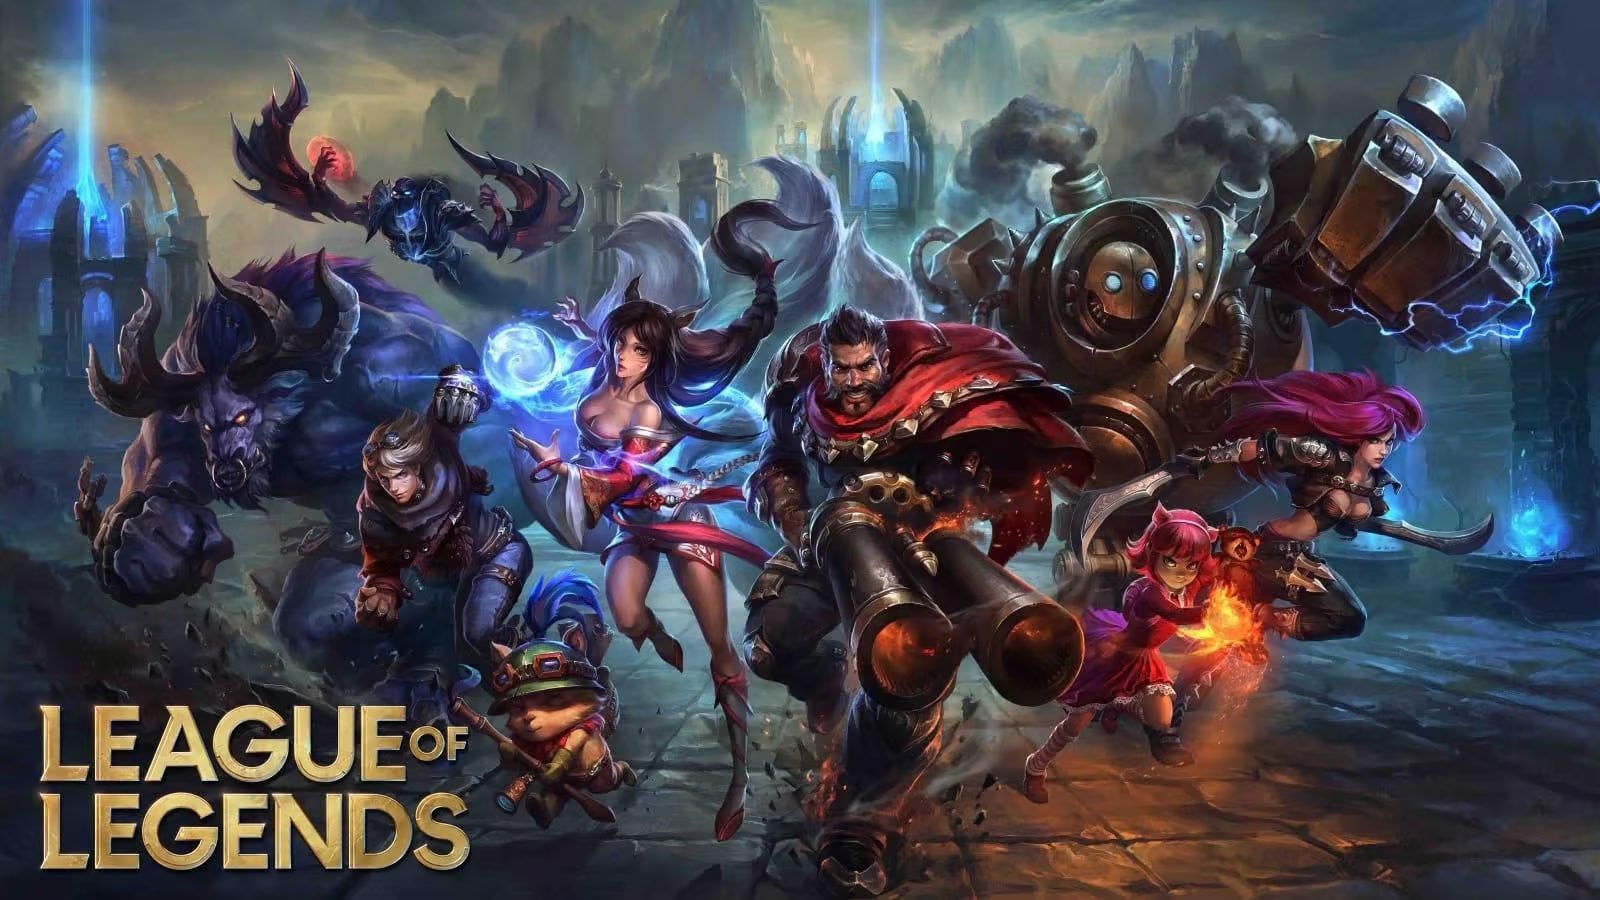 The Call for Collective Action in the World of League of Legends